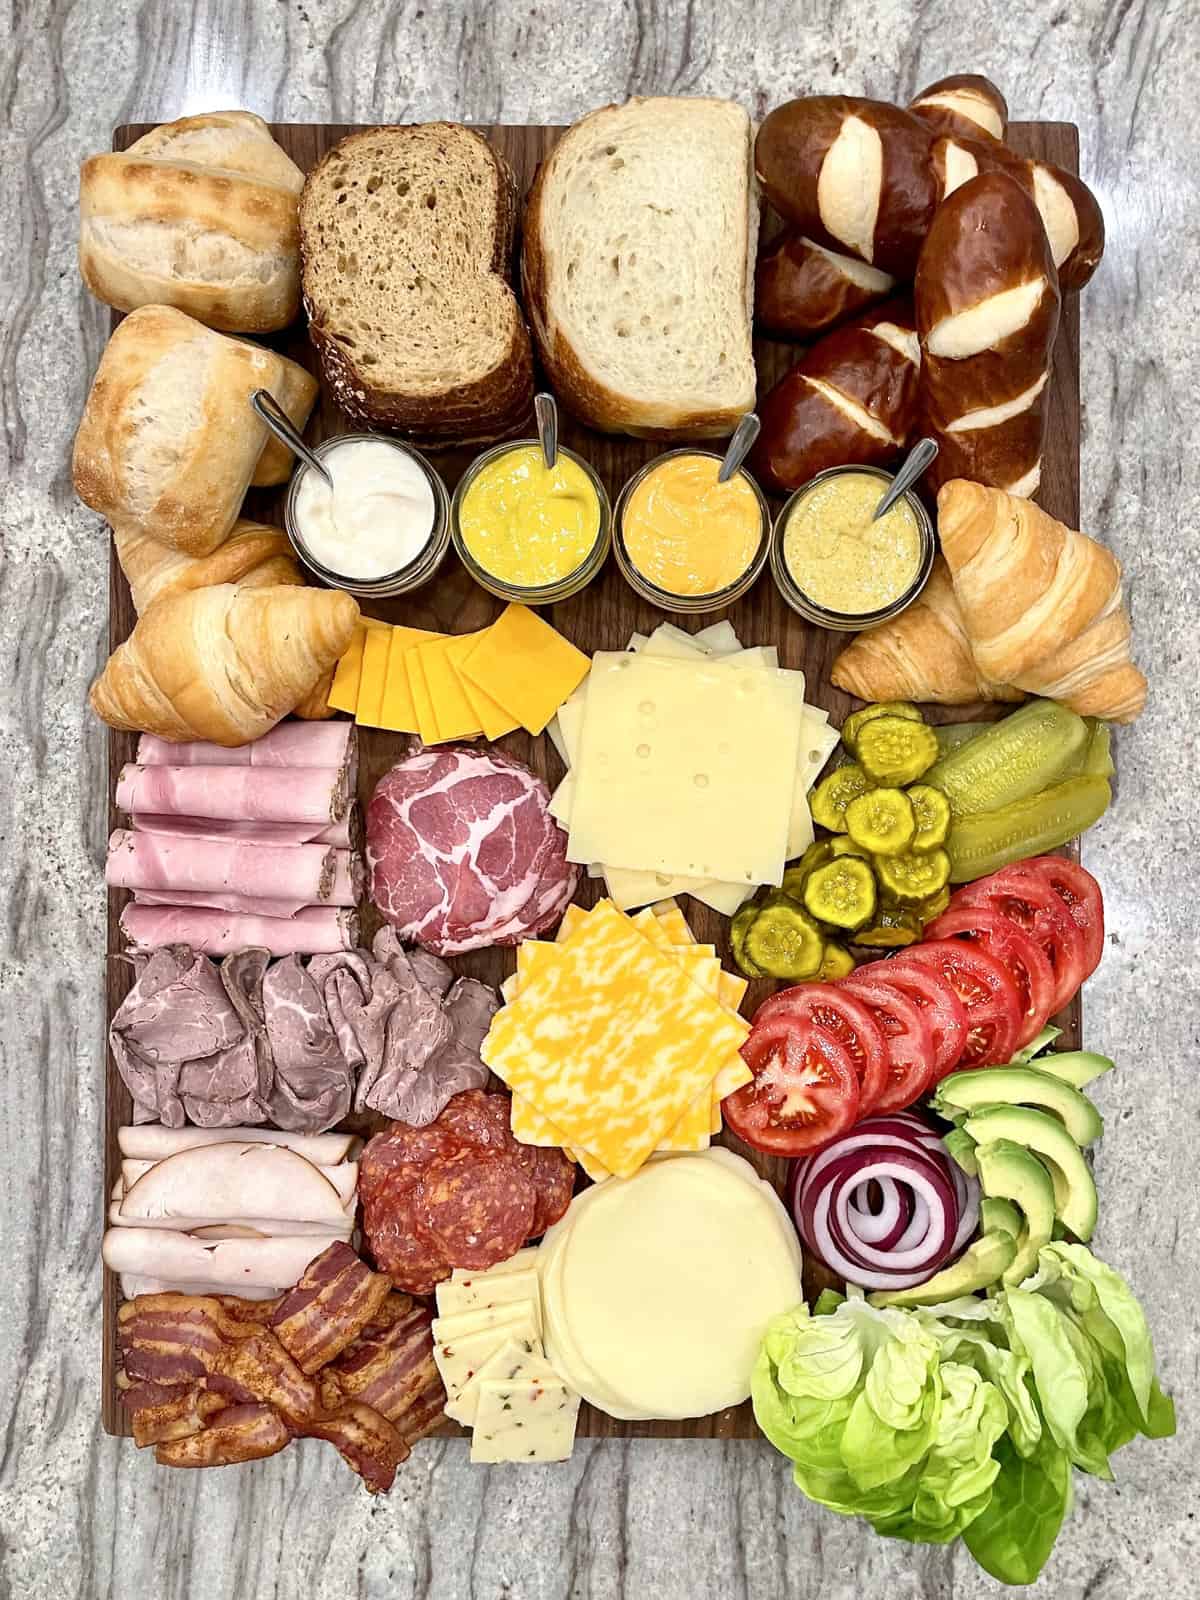 Unleash Your Inner Foodie: 41 Insta-Worthy Charcuterie Board Ideas That Will Make Your Guests Drool 36